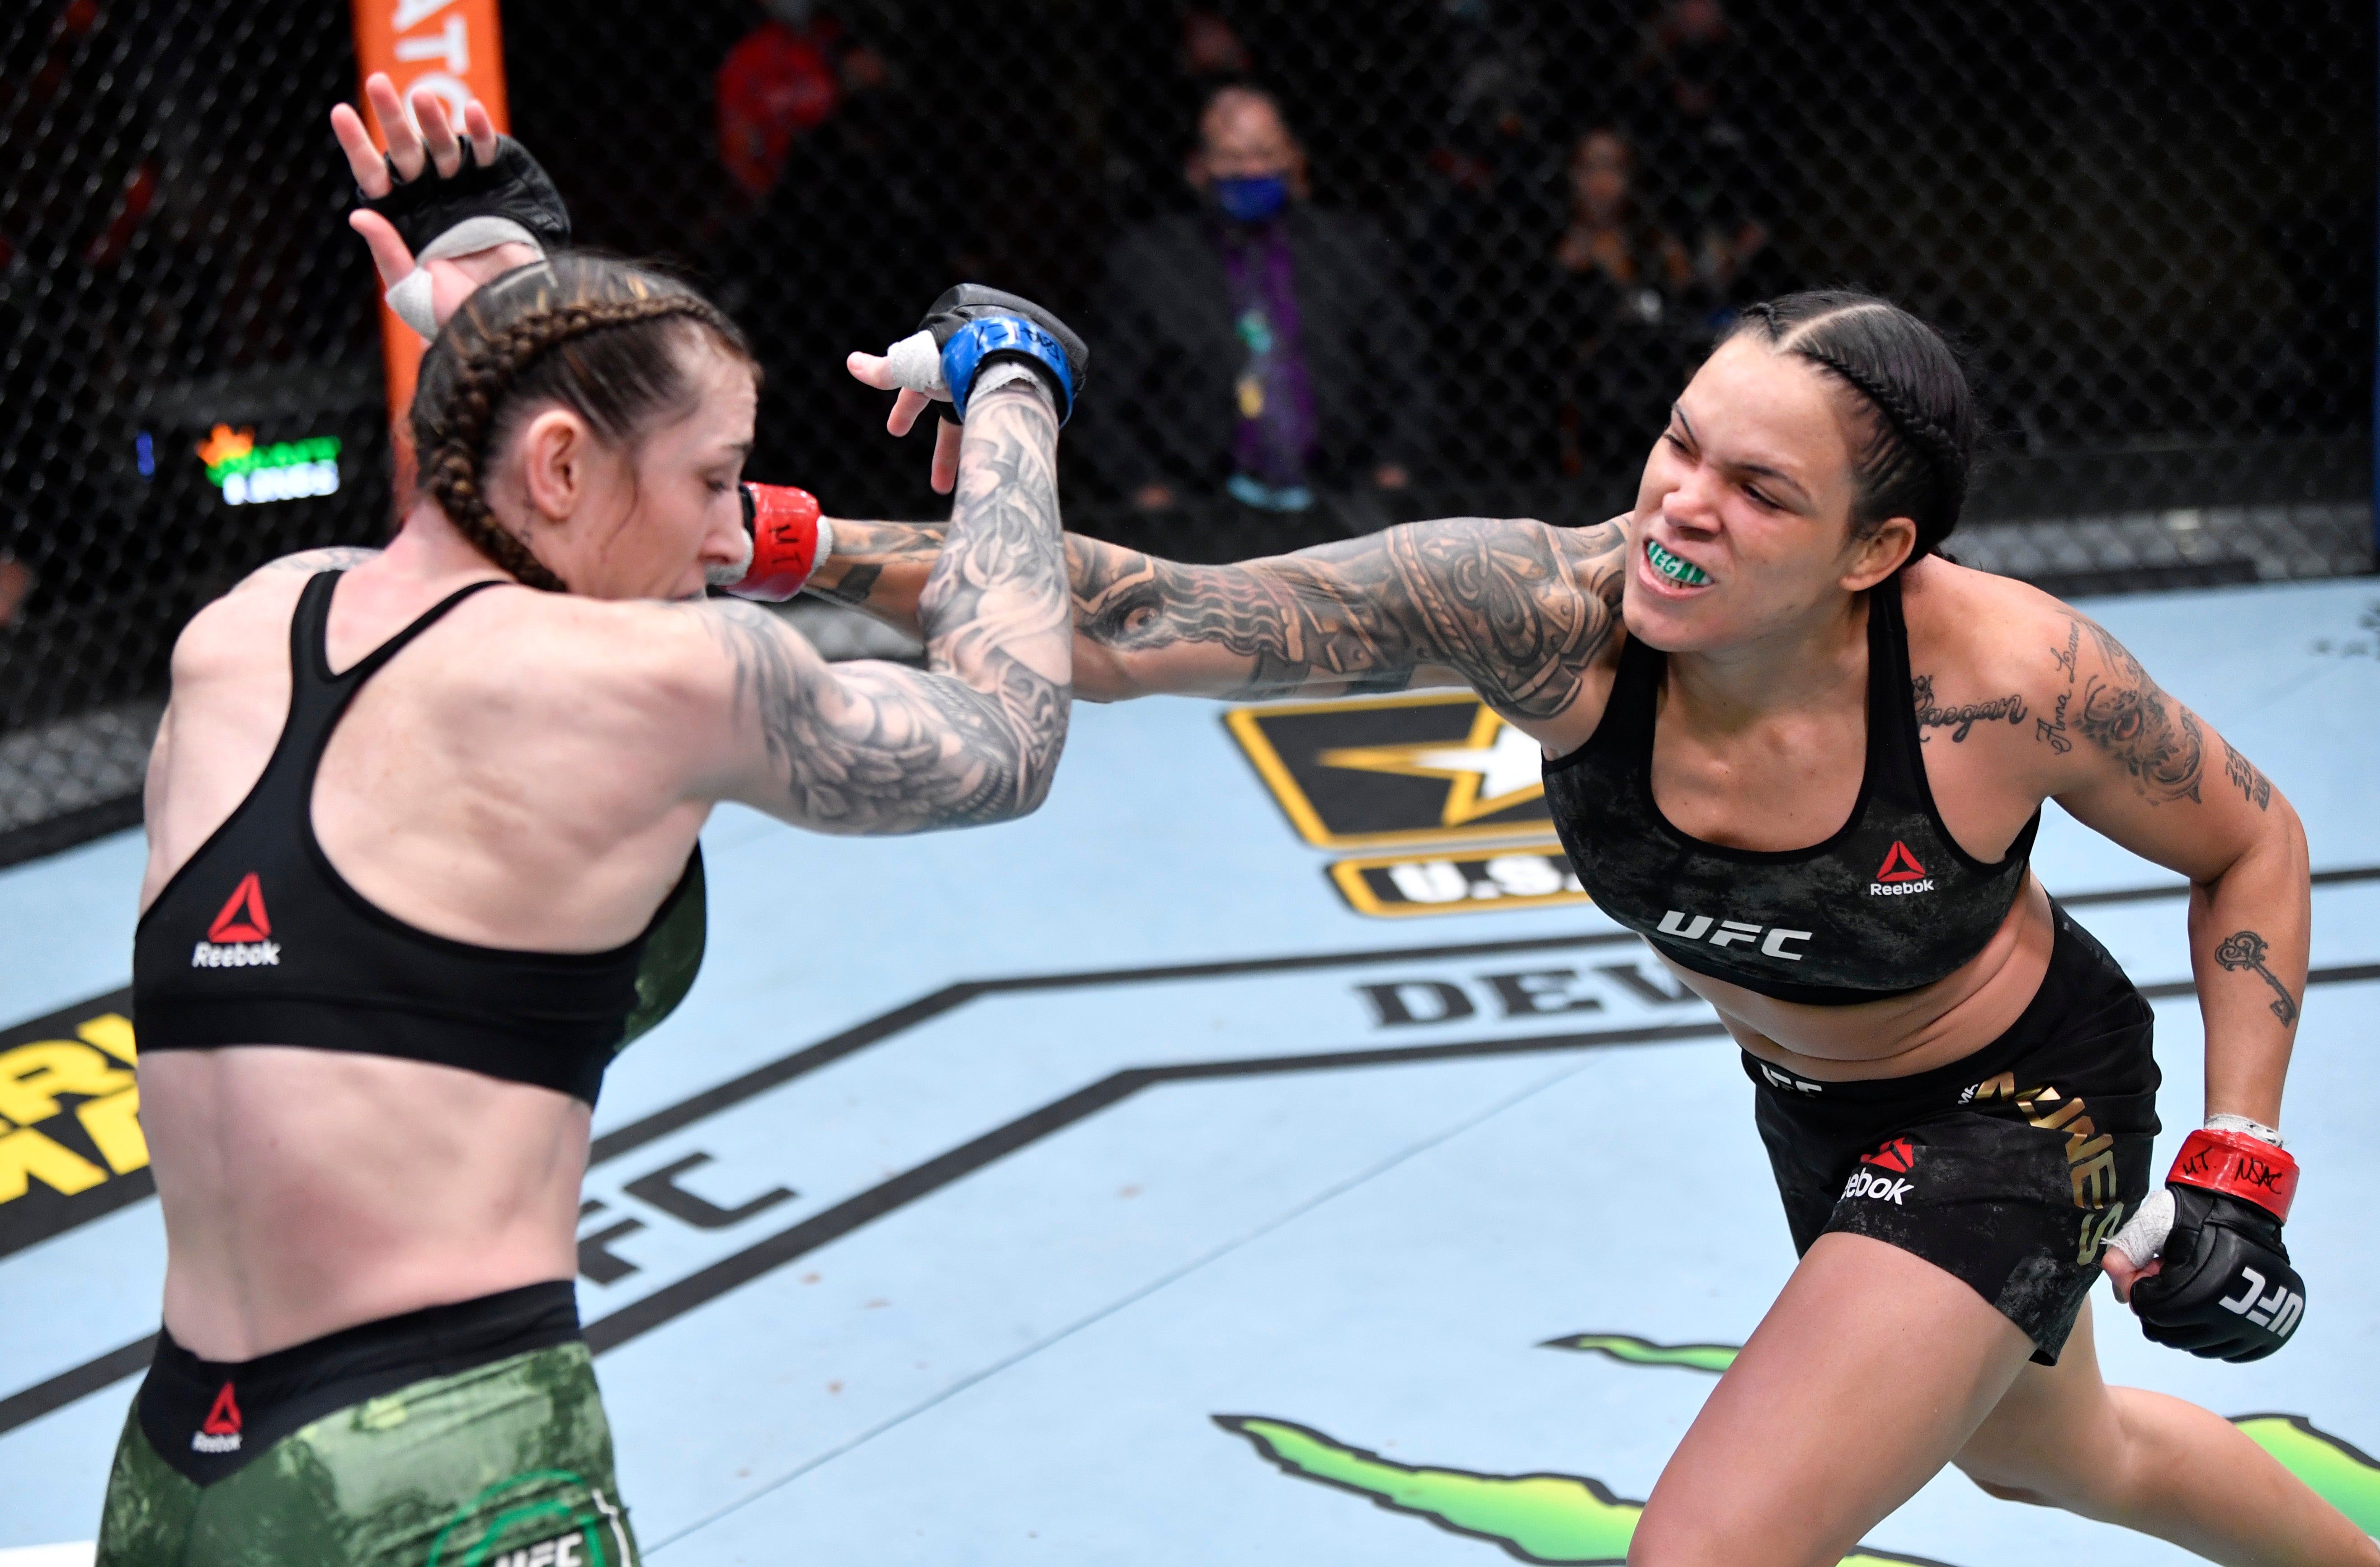 Amanda Nunes (right) retained her women’s featherweight title in dominant fashion